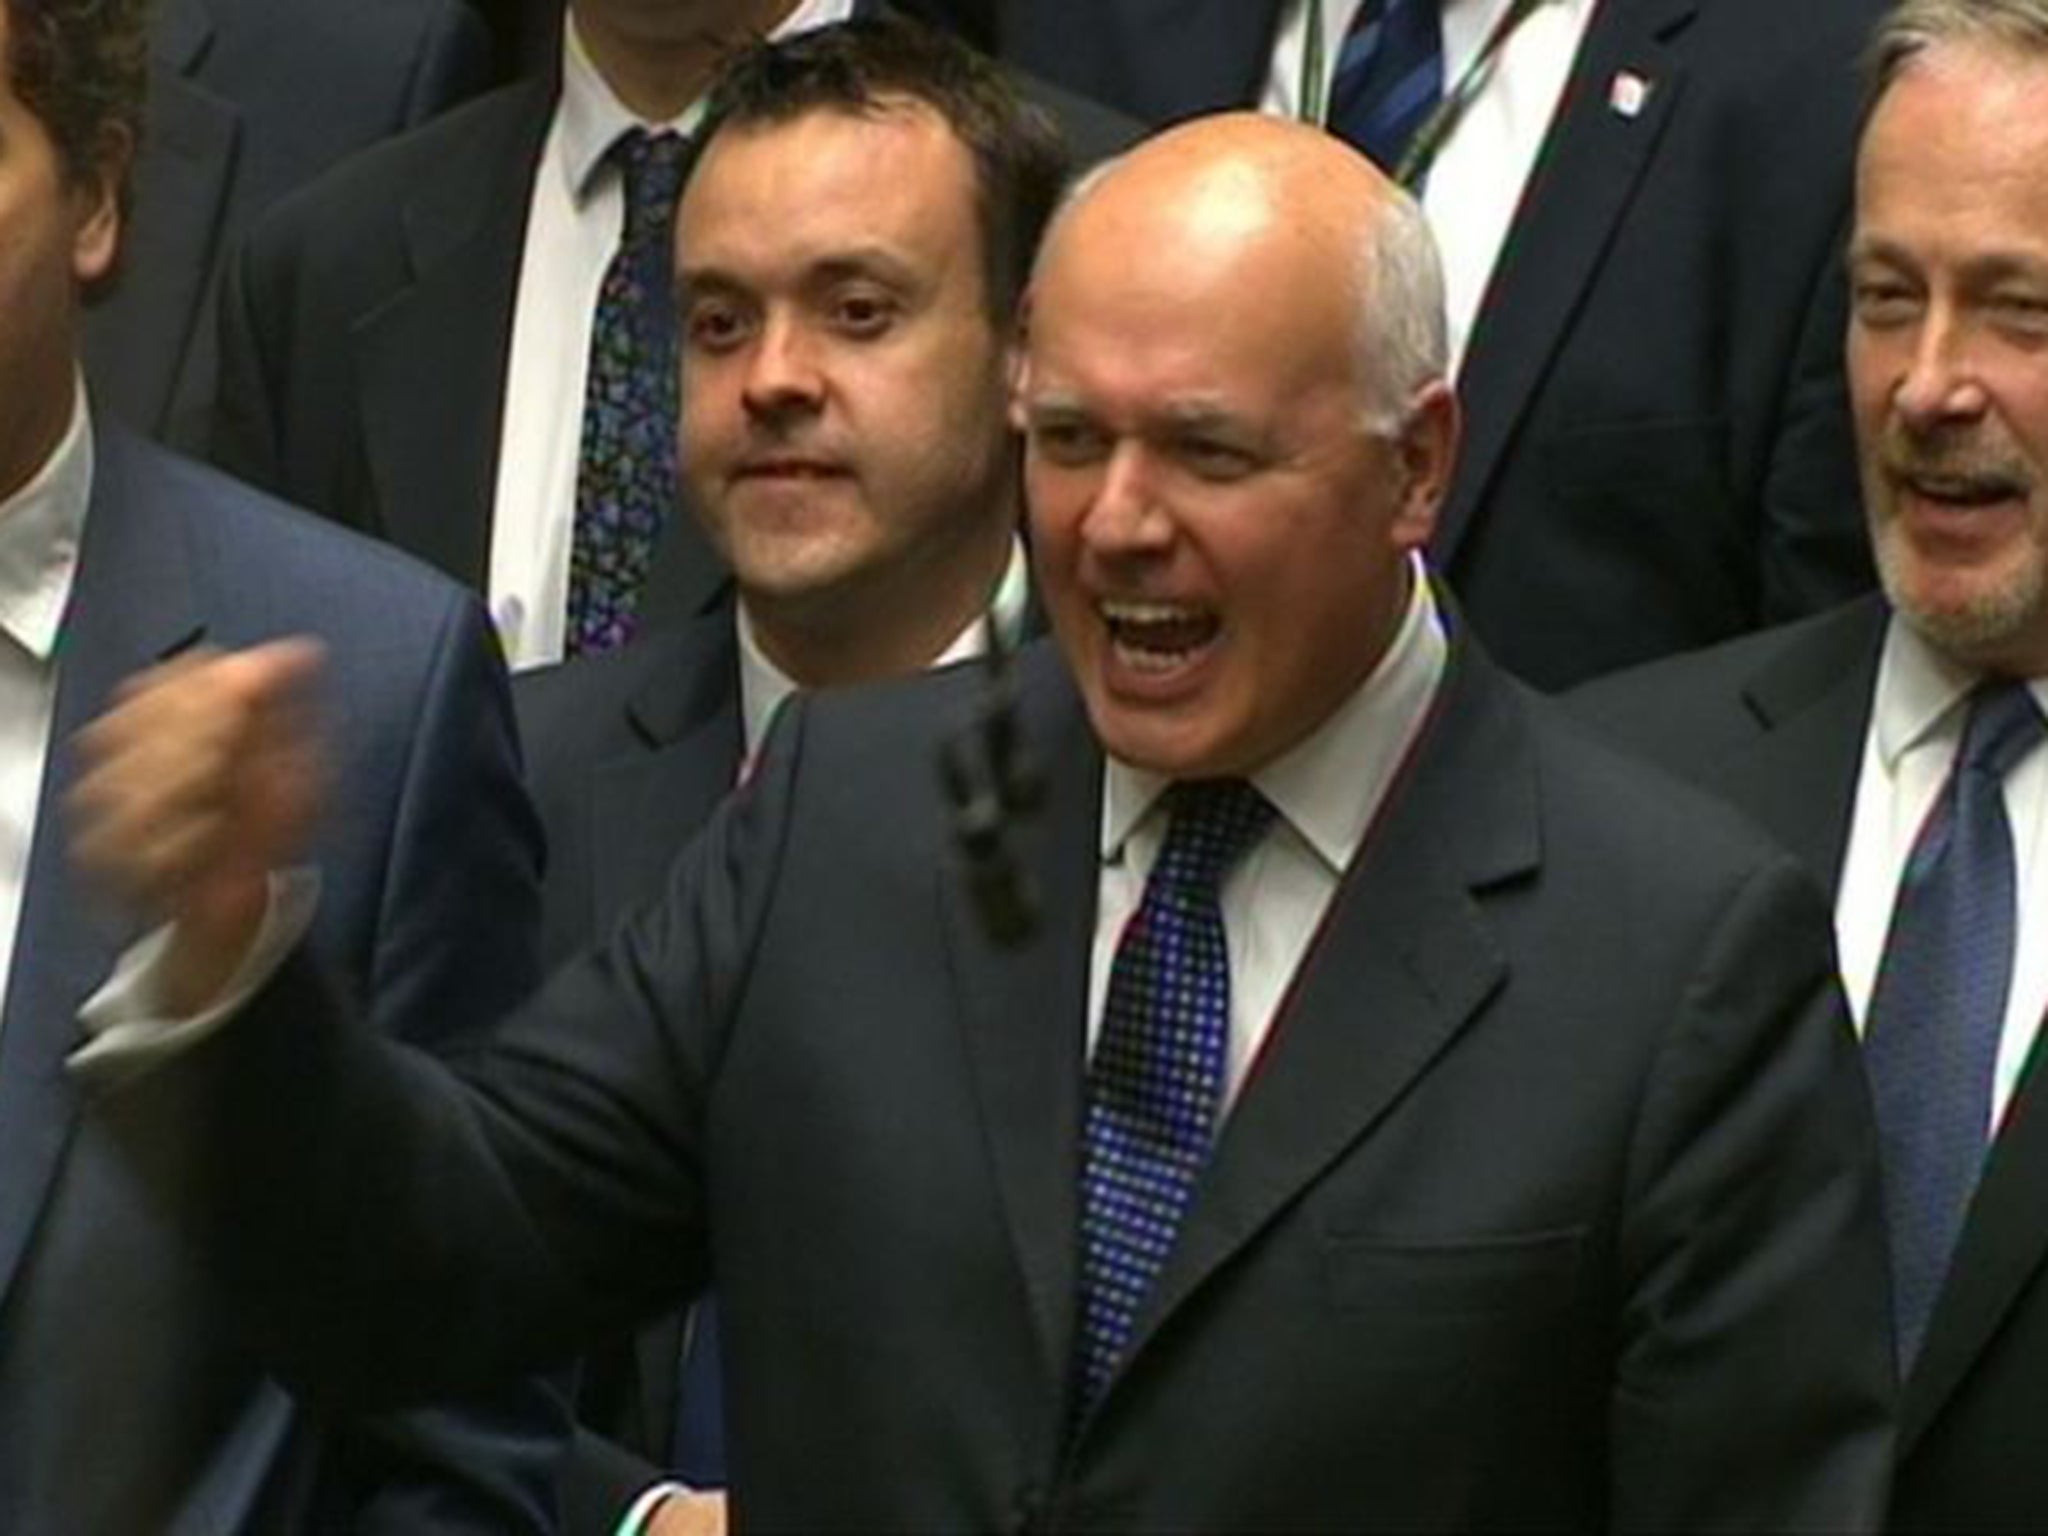 Iain Duncan Smith can hardly control his emotion as George Osborne announces the introduction of a compulsory national minimum wage